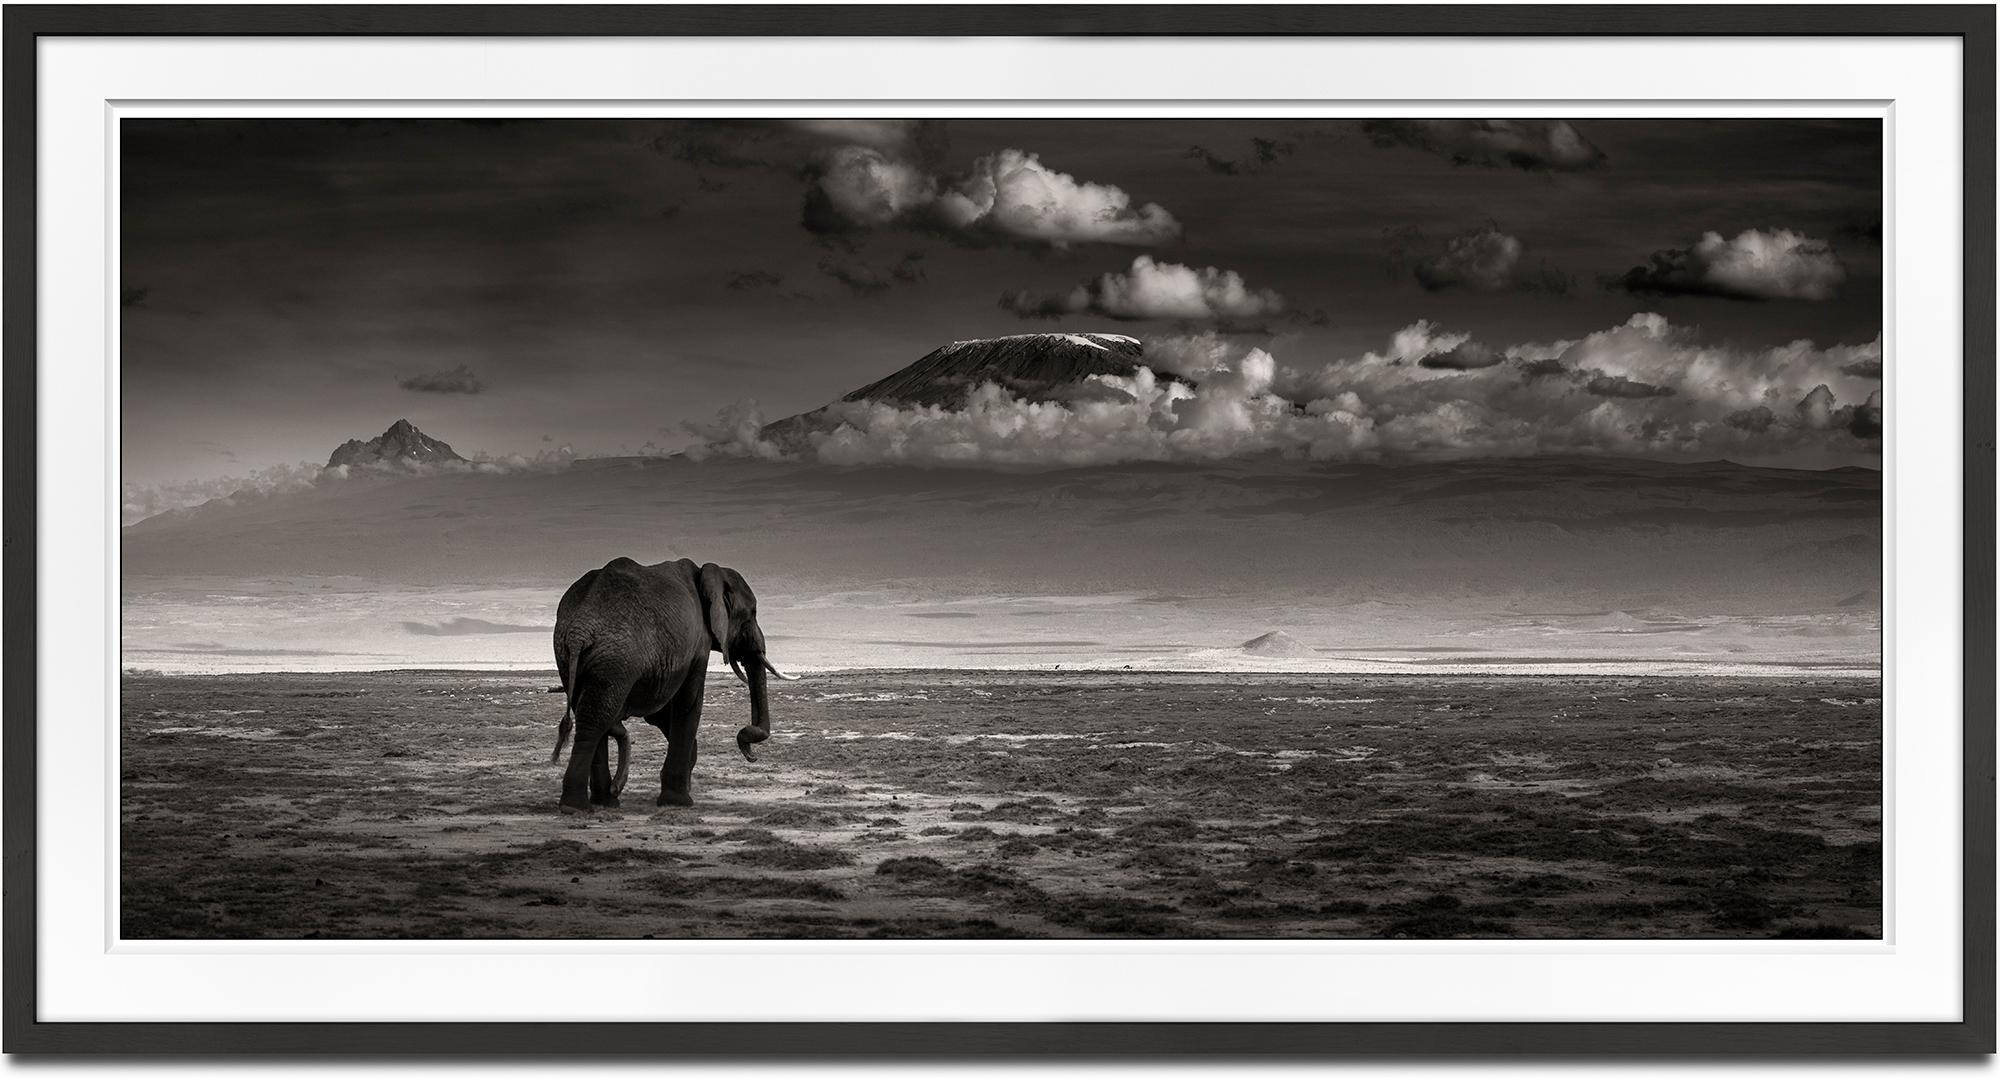 Big bull walking, Elephant, black and white photography, wildlife - Photograph by Joachim Schmeisser